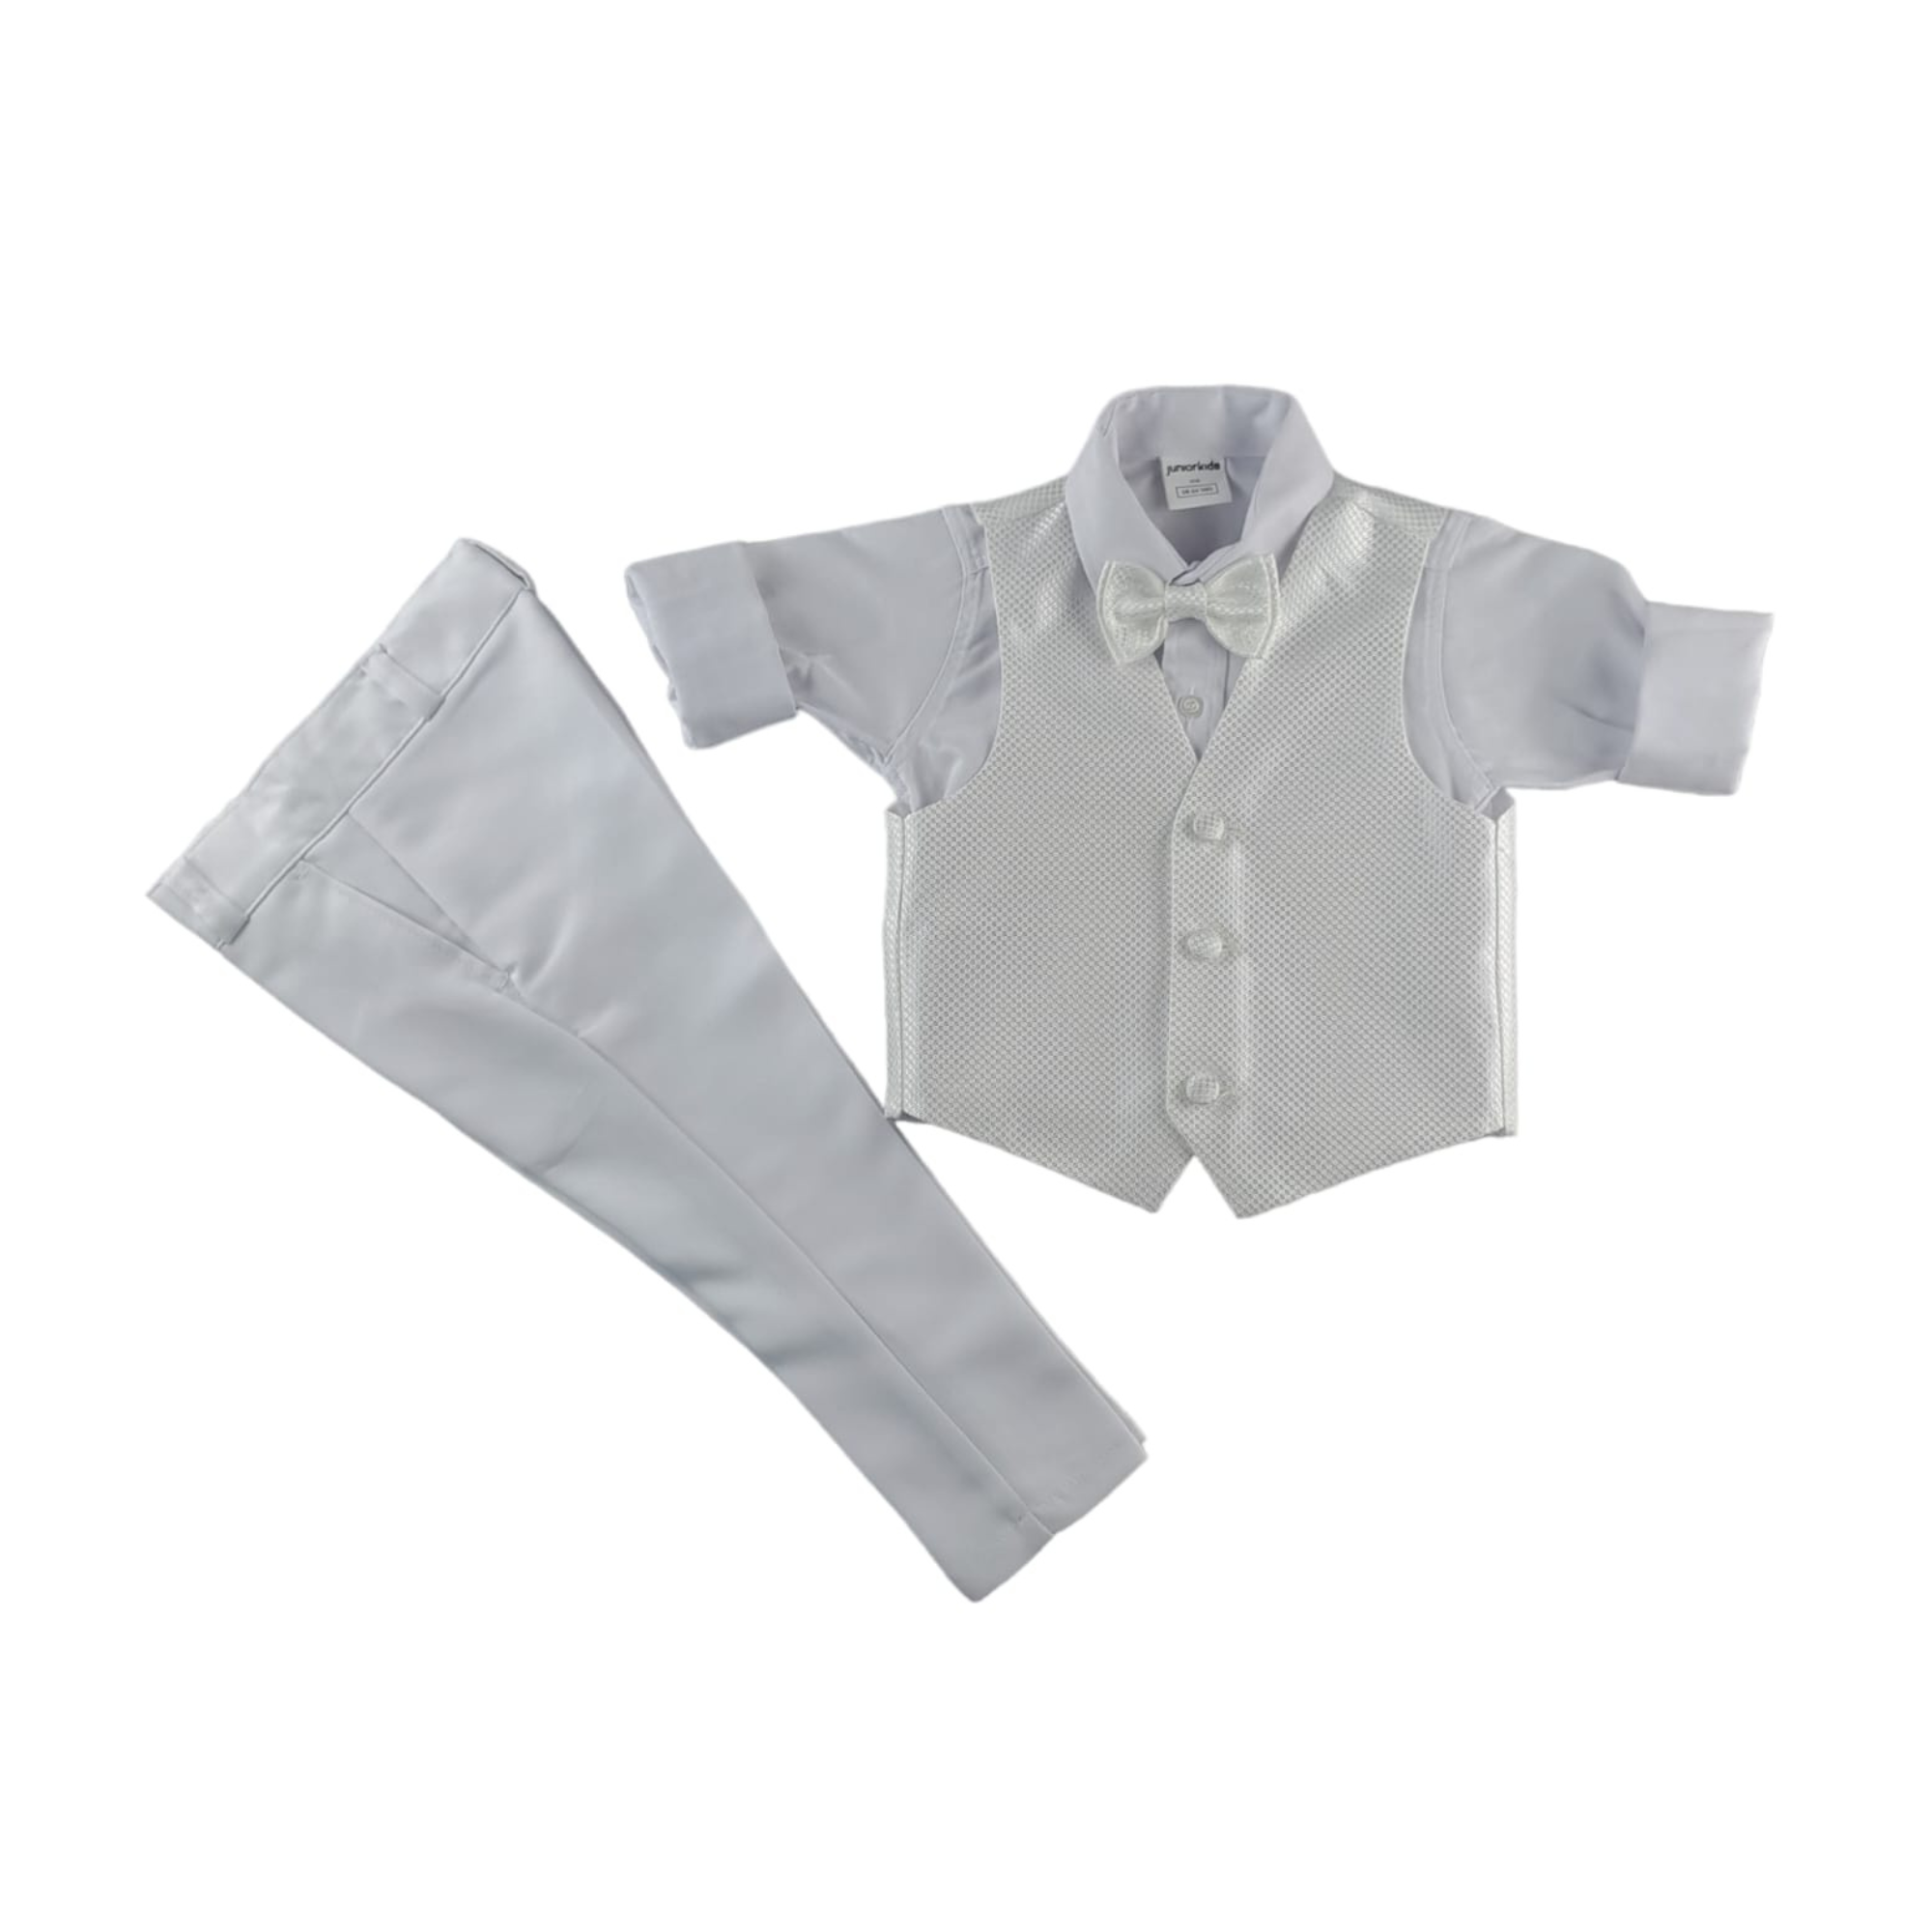 Damiano's Baptism Formal Boys Suit